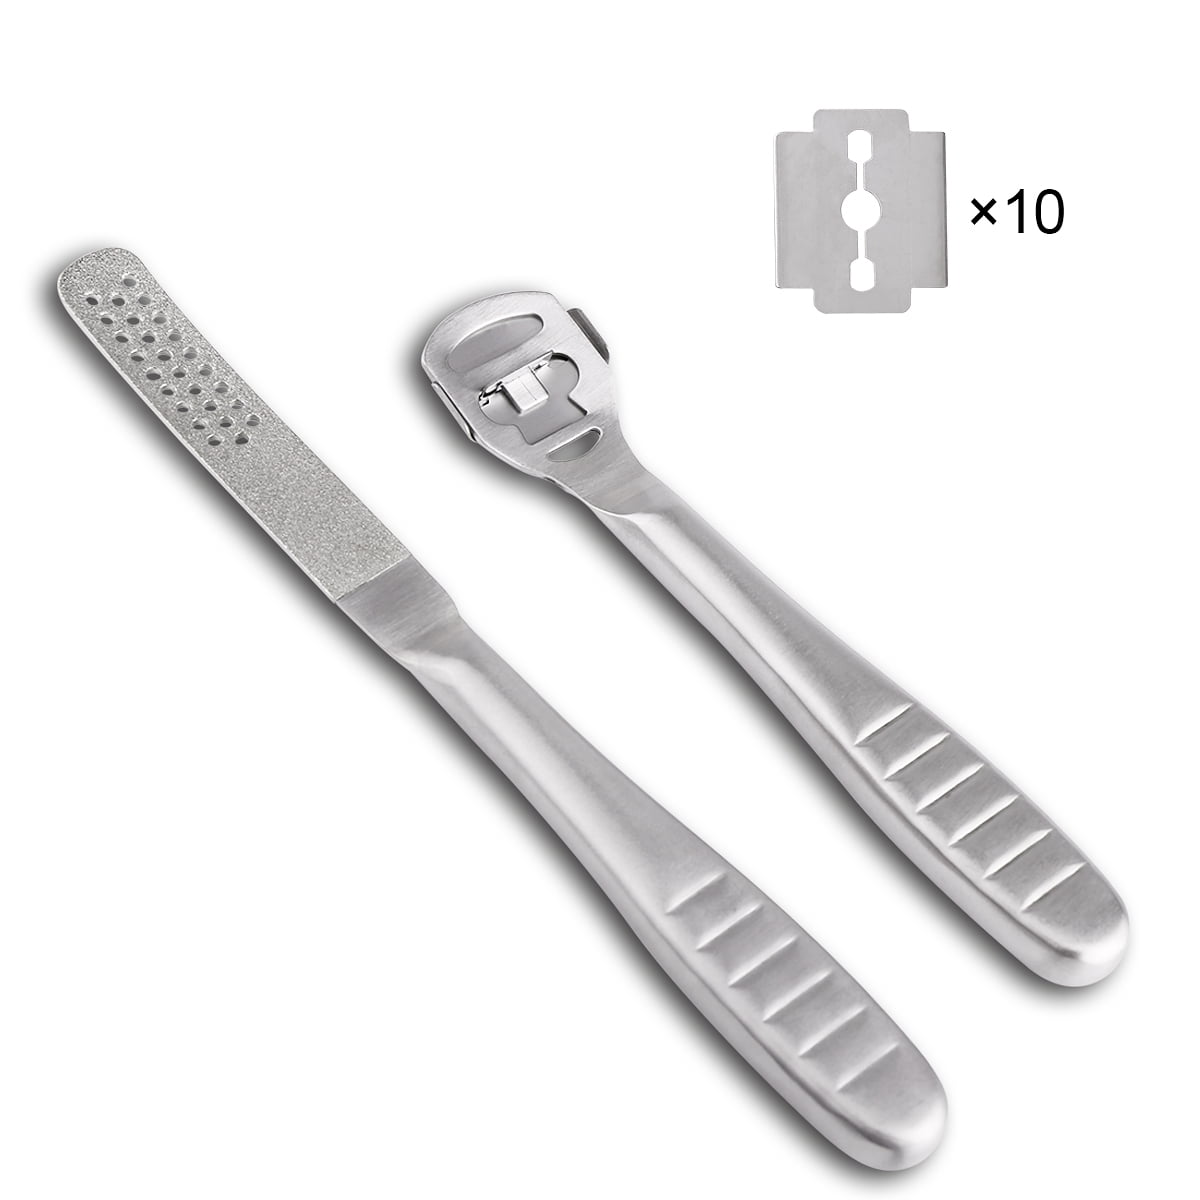 Foot File Callus Remover, Stainless Steel Foot Scrubber, File Cracked Heel  Scraper - Gilt [exquisite style] / high-grade coated handle + stainless